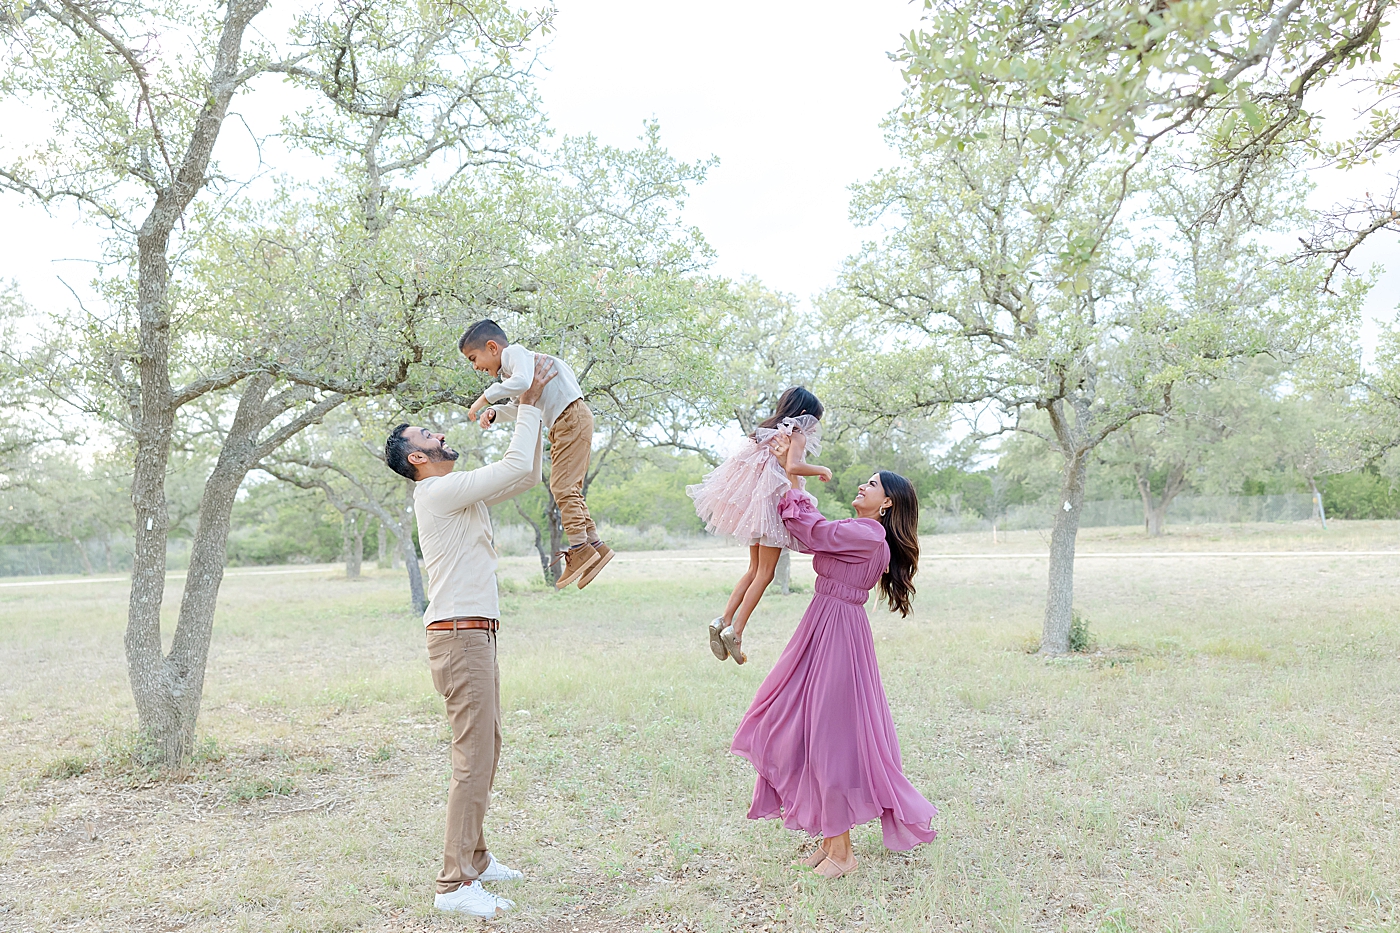 Mom and dad playing with their two kids during their Field Family Session | Image by Sana Ahmed Photography